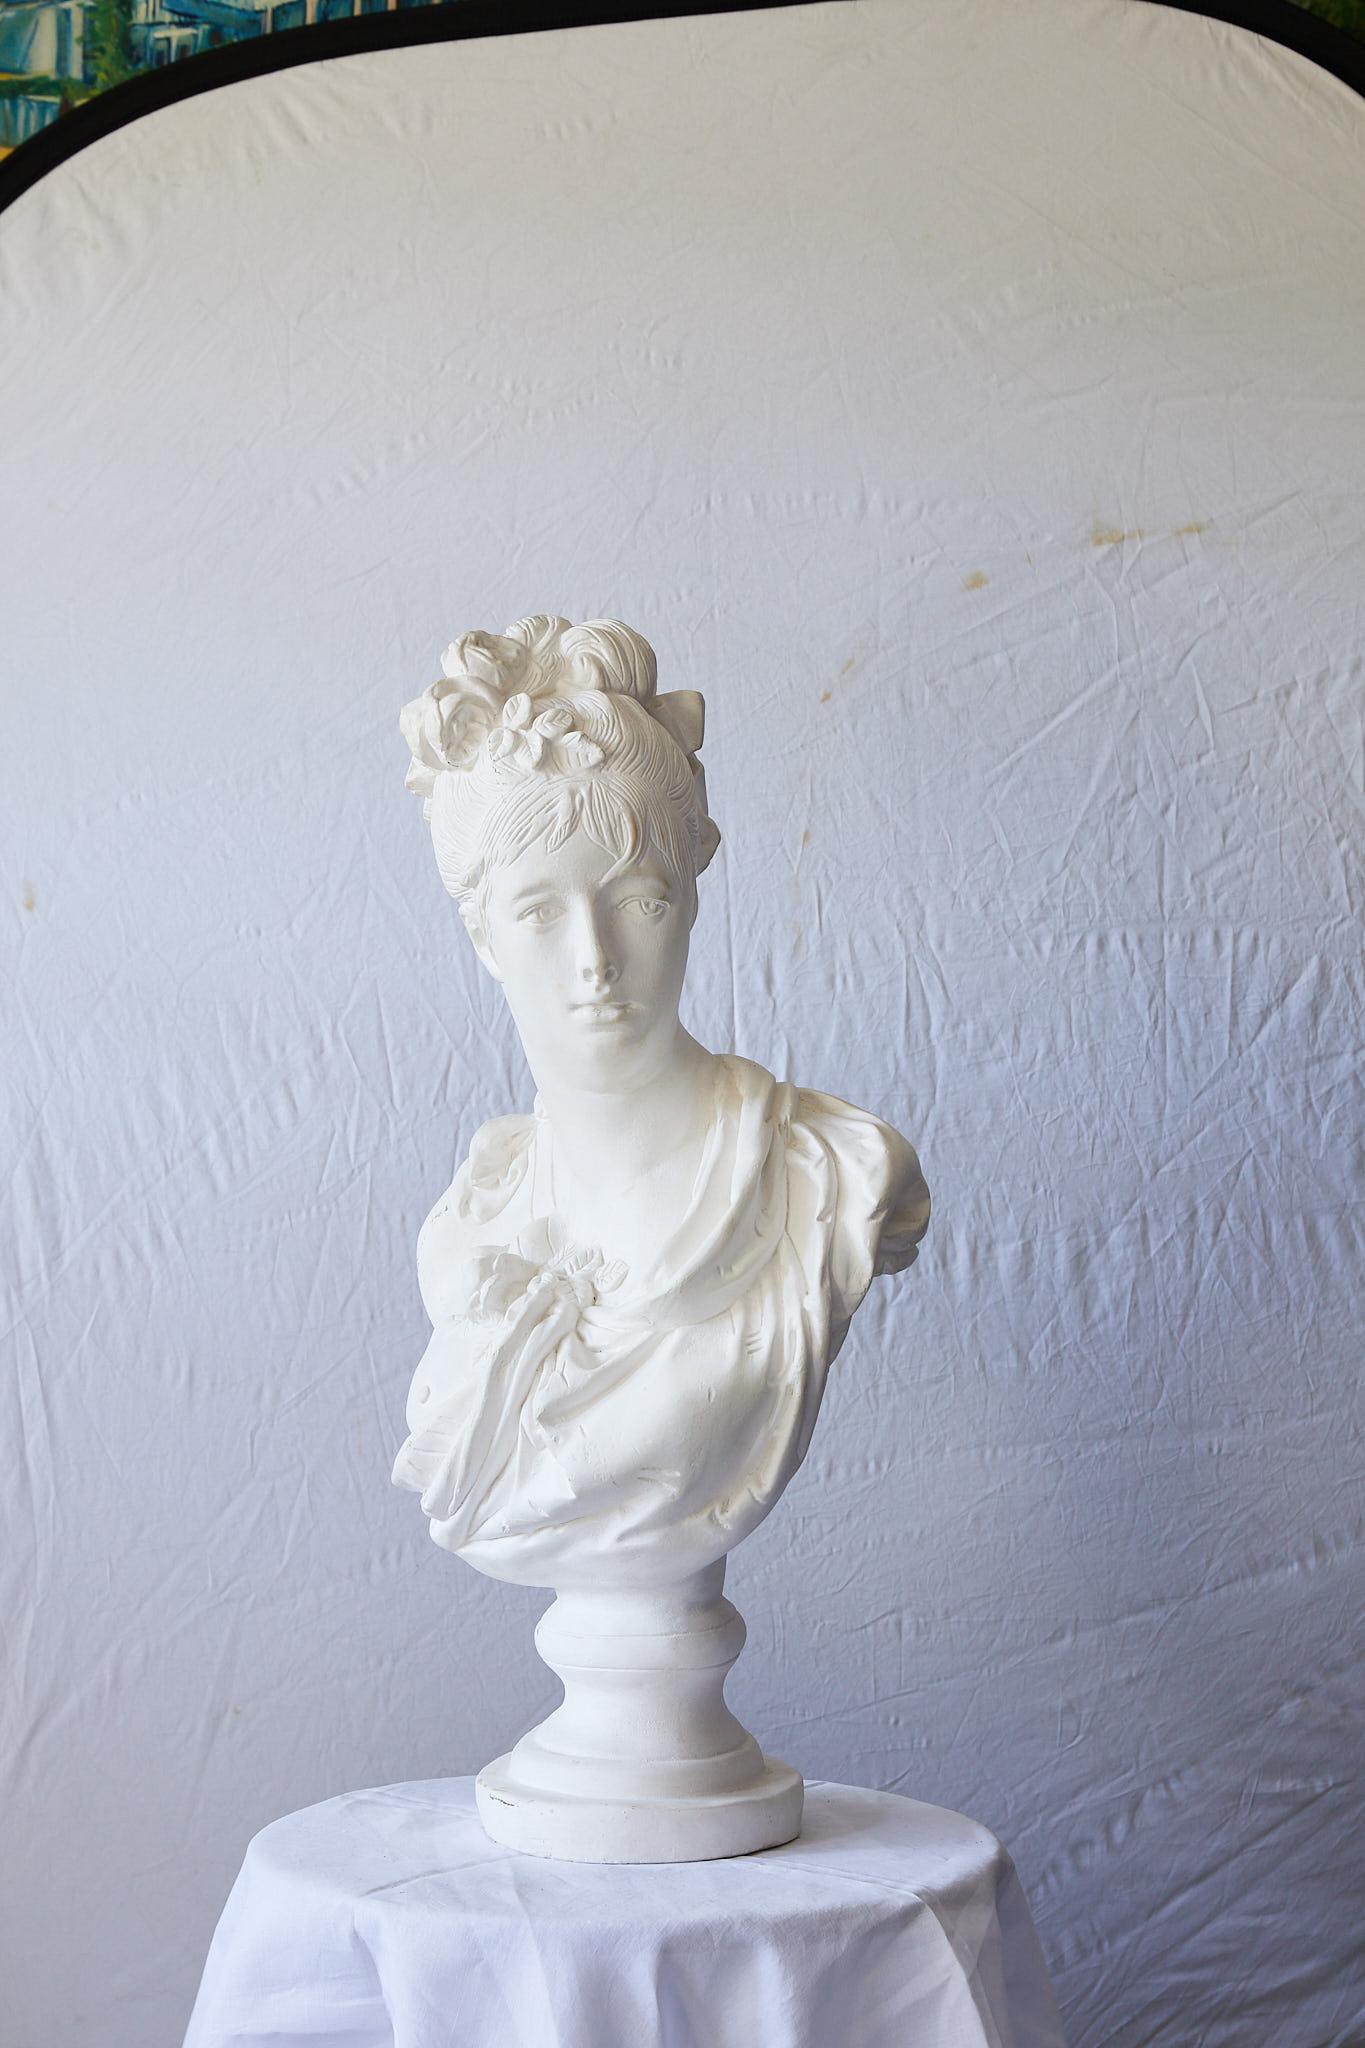 20th century large Hollywood Regency cast plaster portrait of a lady. Flowers and ribbons beautifully accent the upswept hair and draped fabric bodice. The vintage sculptural bust is raised on a tiered round pedestal and is signed on the back.